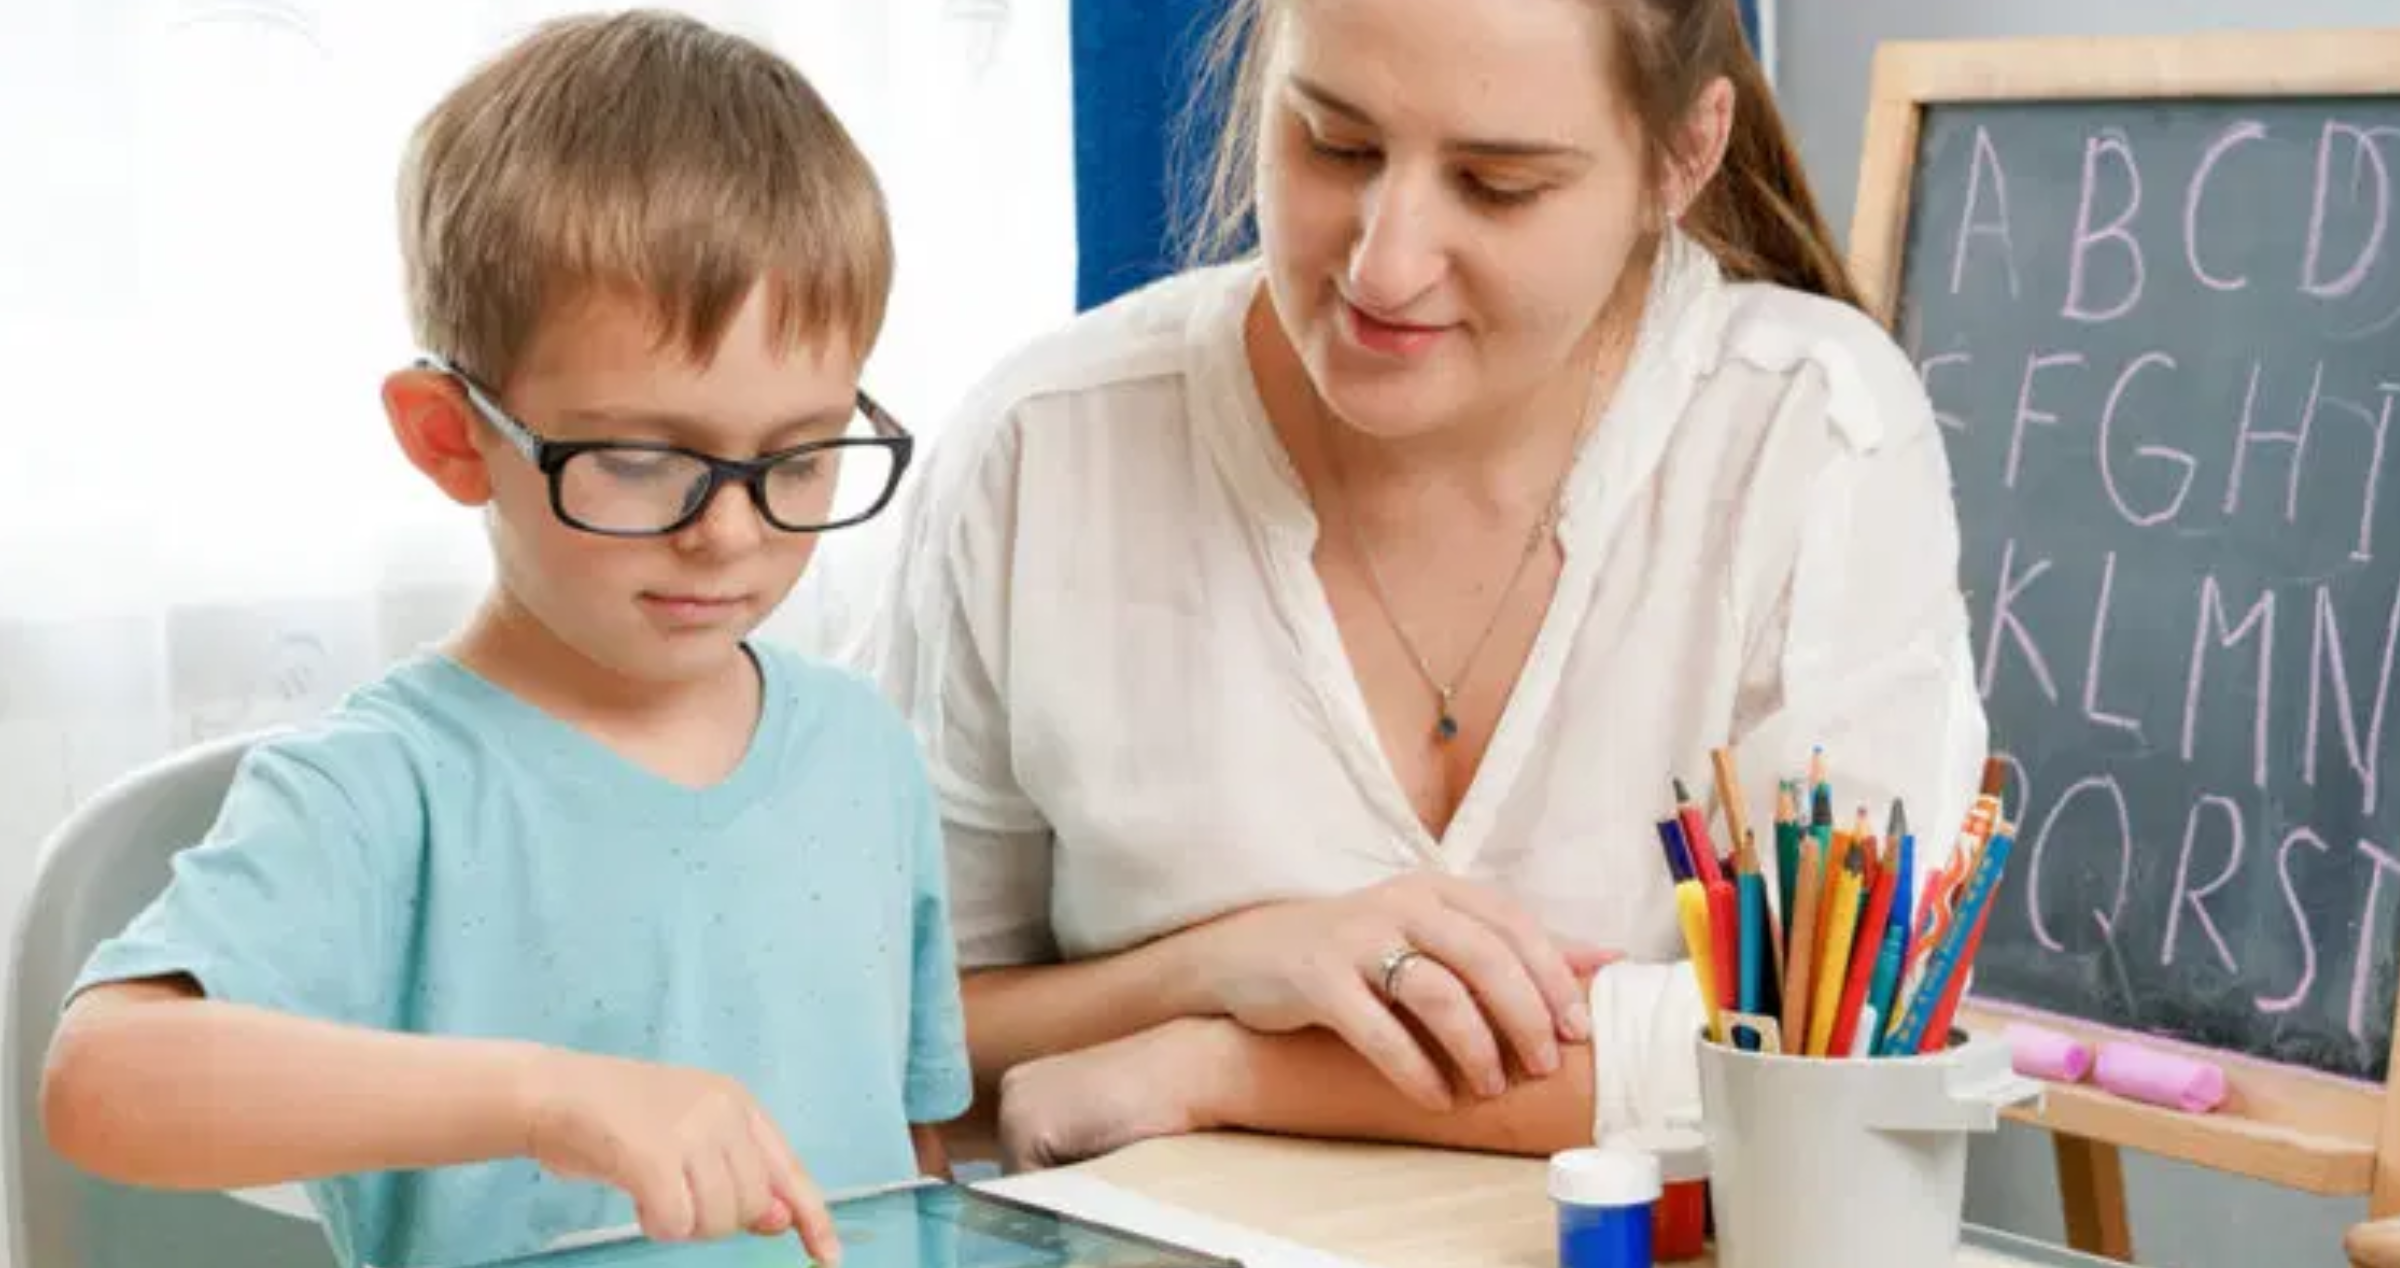 Image of a child (wearing glasses) using an ipad with his teacher